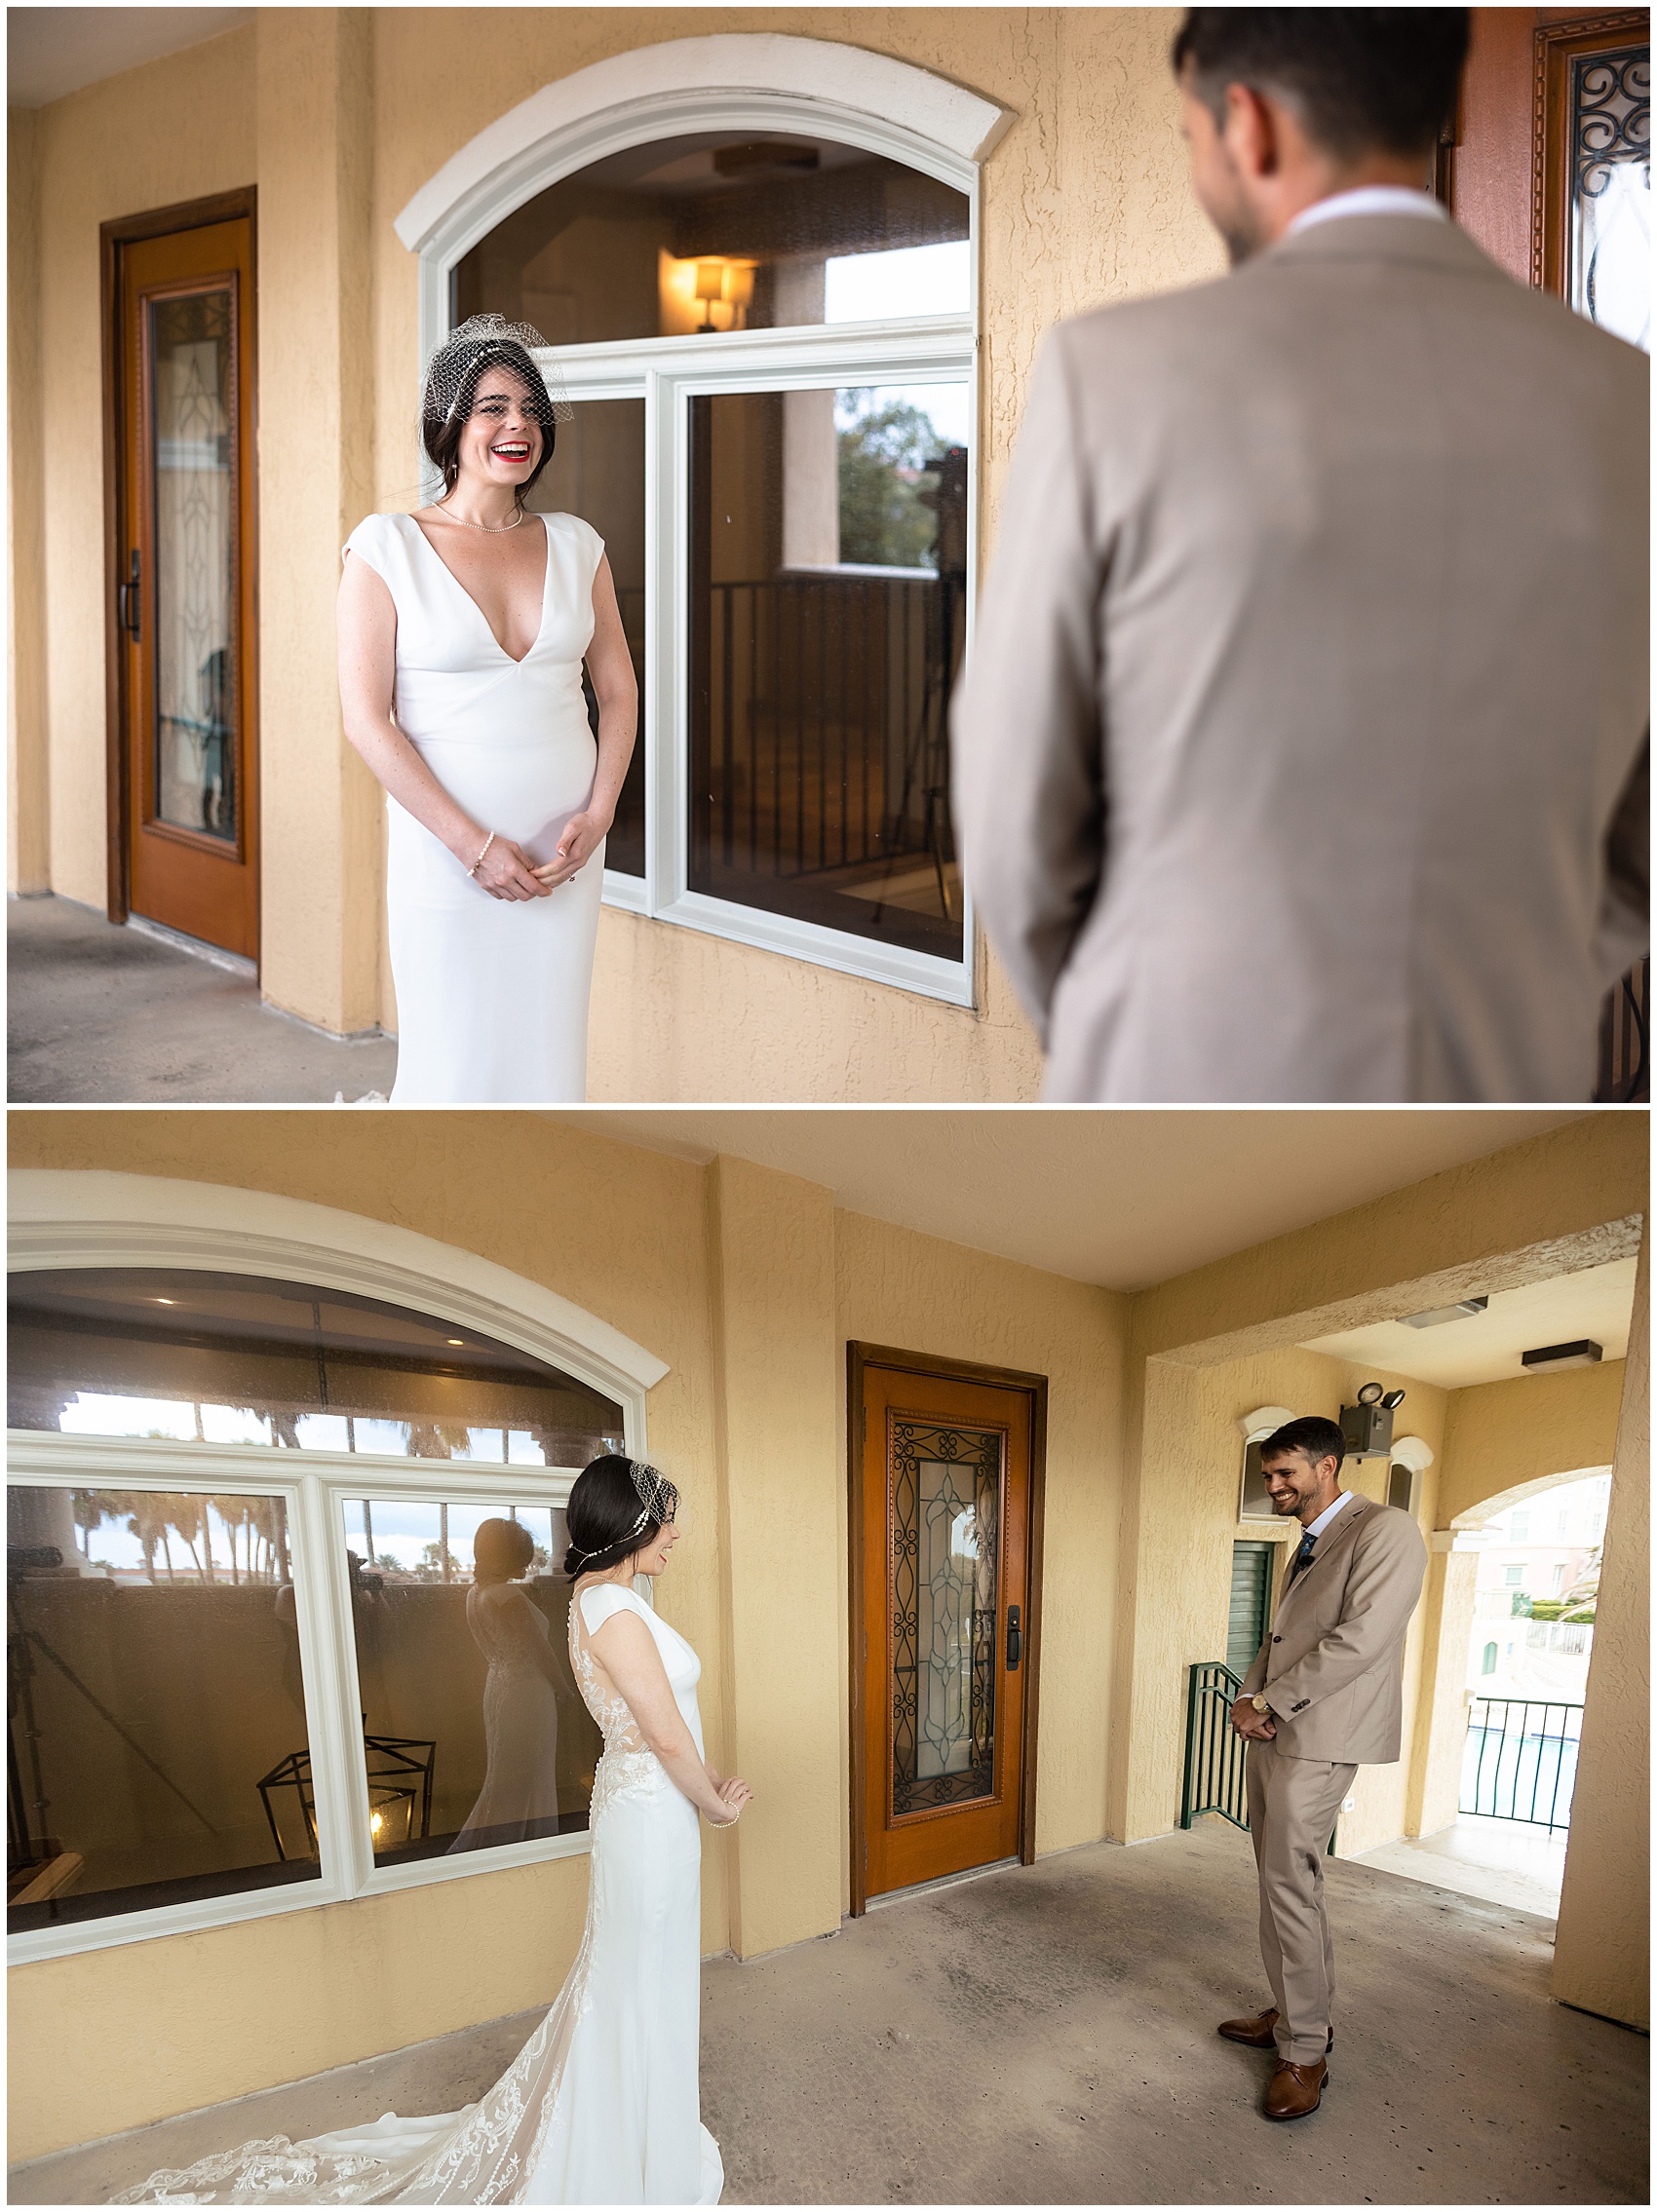 A groom smiles big while seeing his bride for the first time in her dress